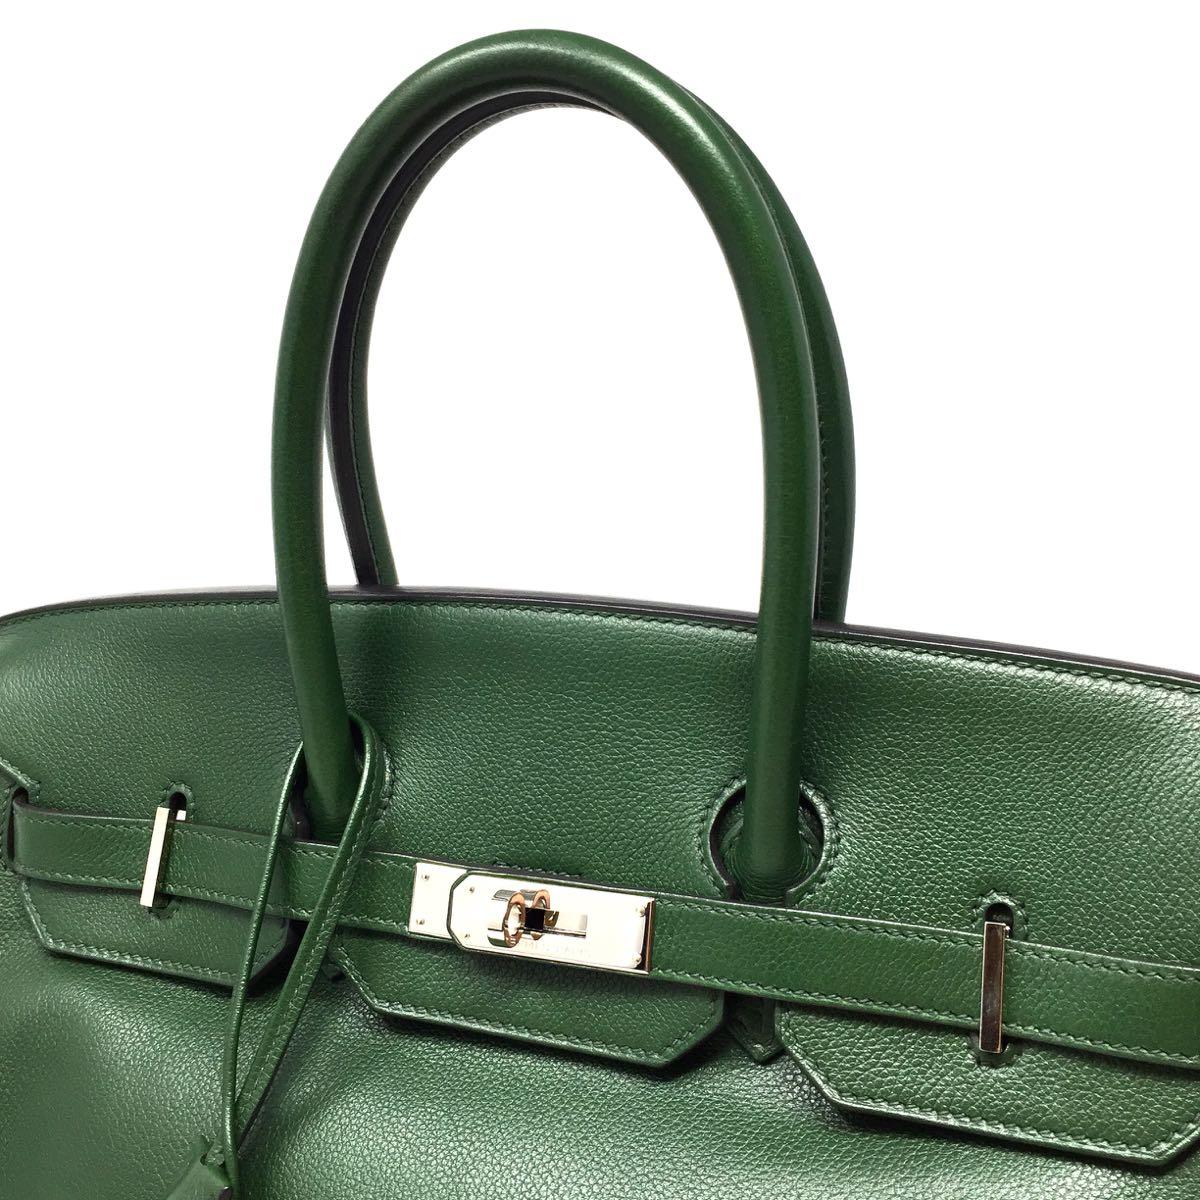 Hermes Birkin 35 in Green olive veau graine leather. Palladium hardware and in excellent condition. Beautiful dark green that will add a pop of color to any wardrobe.  Stamped O square from 2011. Dust-bag, clochette loco key and protege pluie